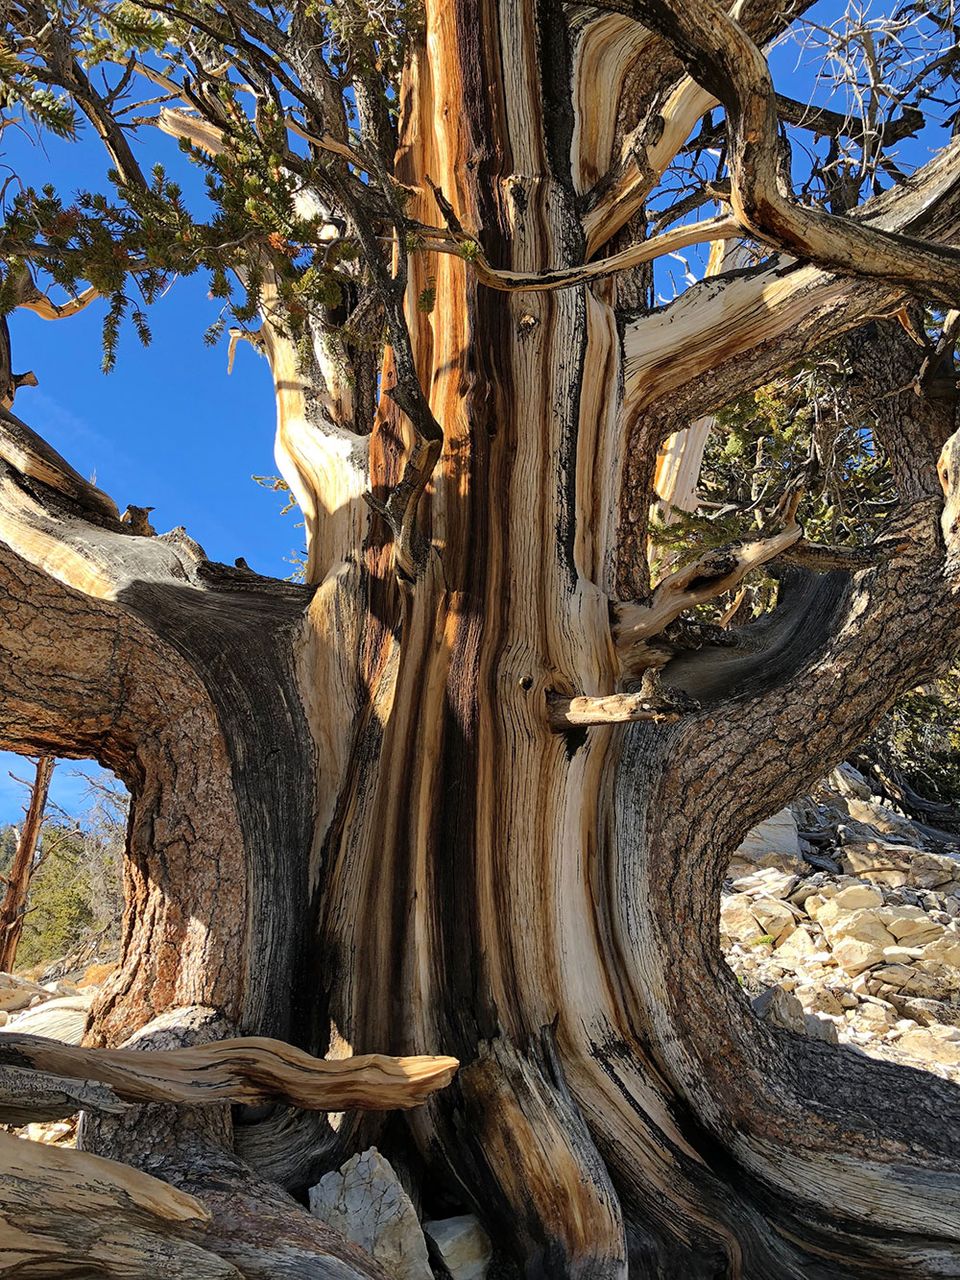 Texture of an ancient tree at Bristlecone Pine National Monument